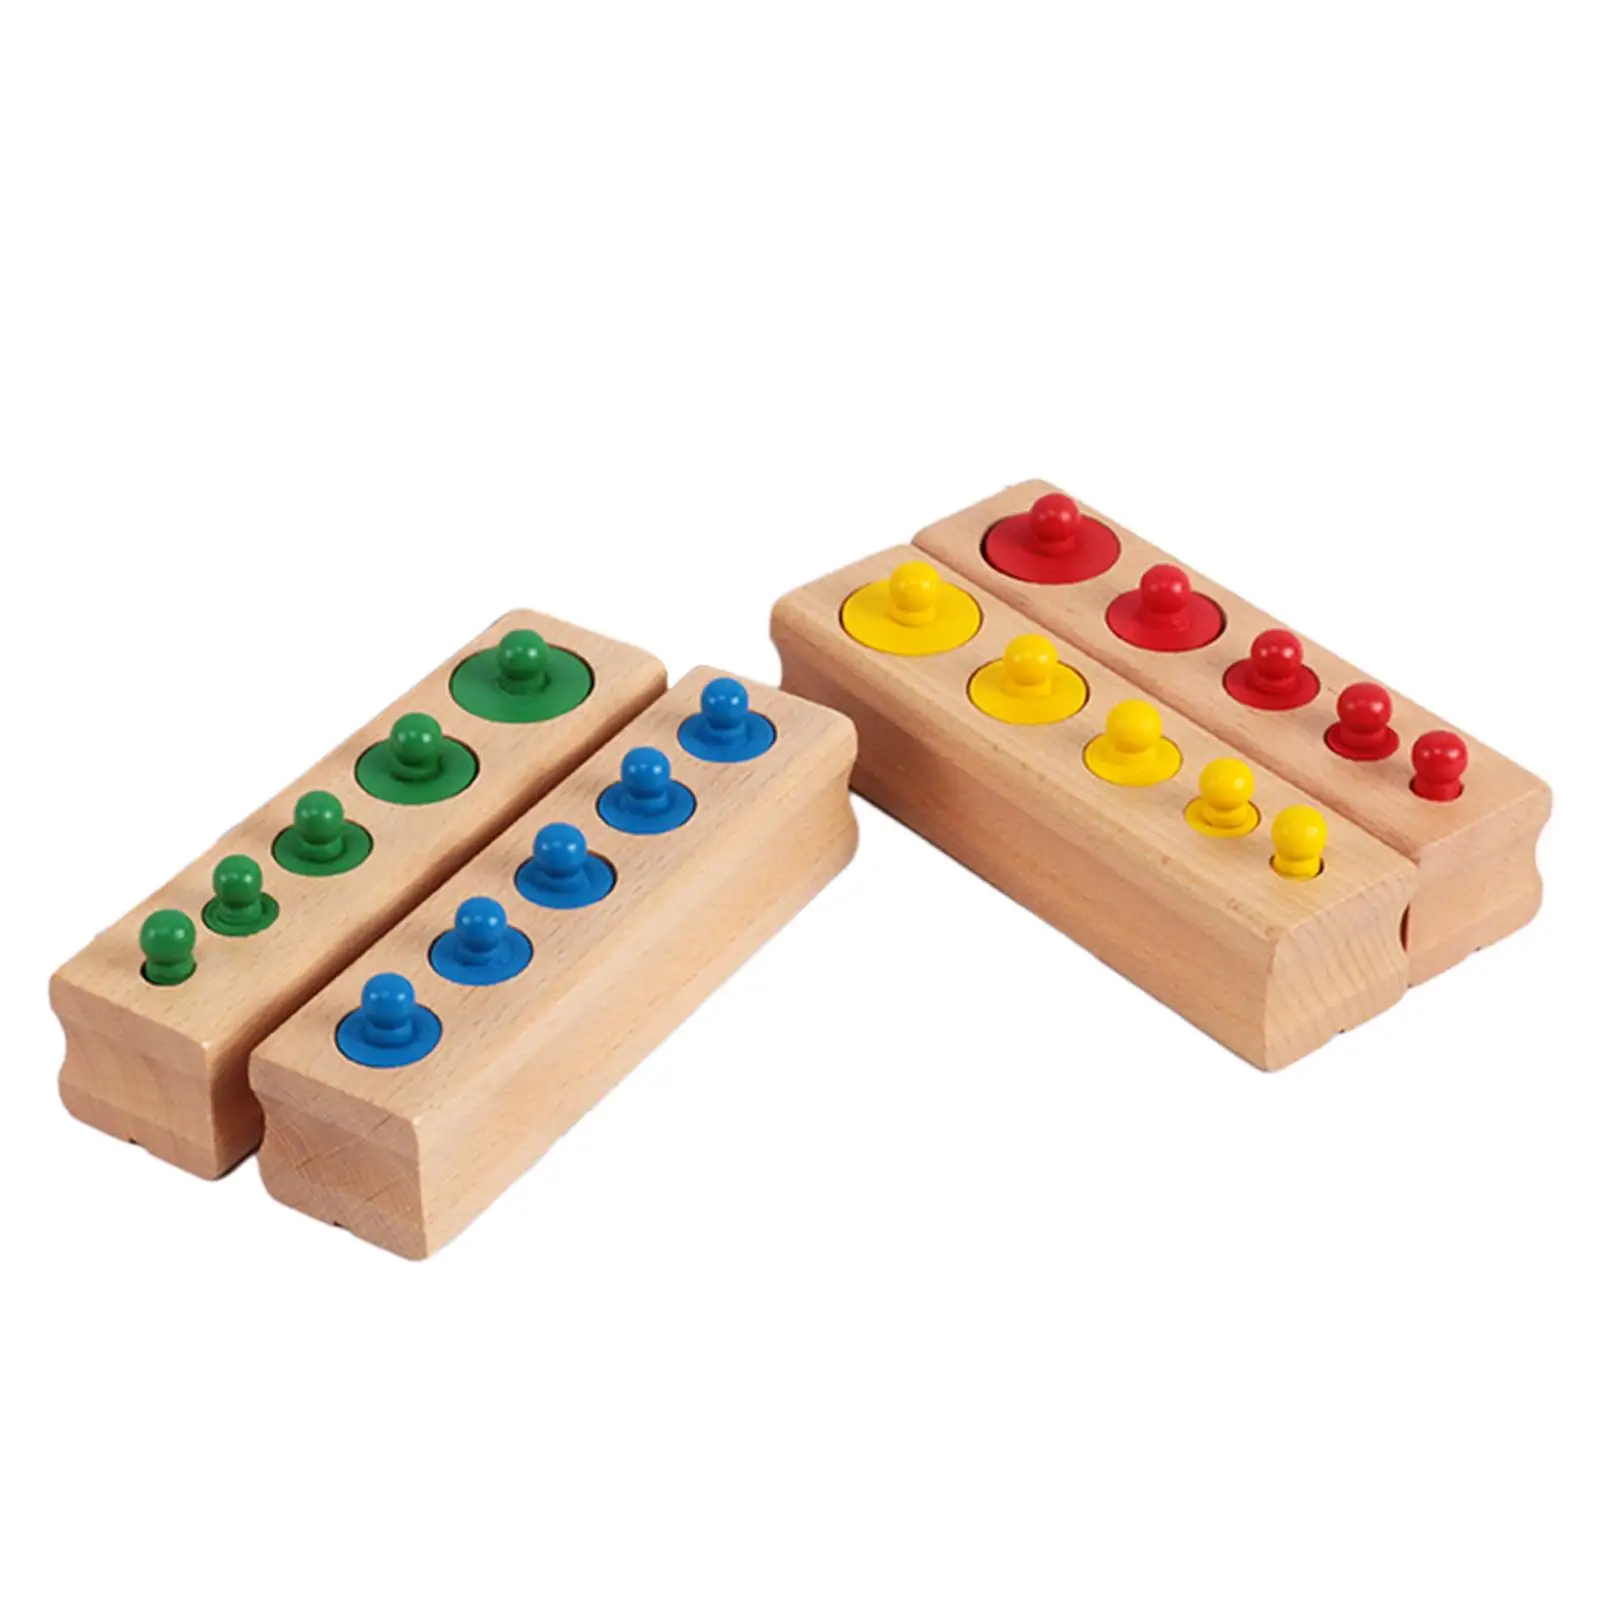 4Pcs Knobbed Cylinders Blocks Socket Colorful Early Development Montessori Toy for Preschool Toys School Home Childern Toddlers